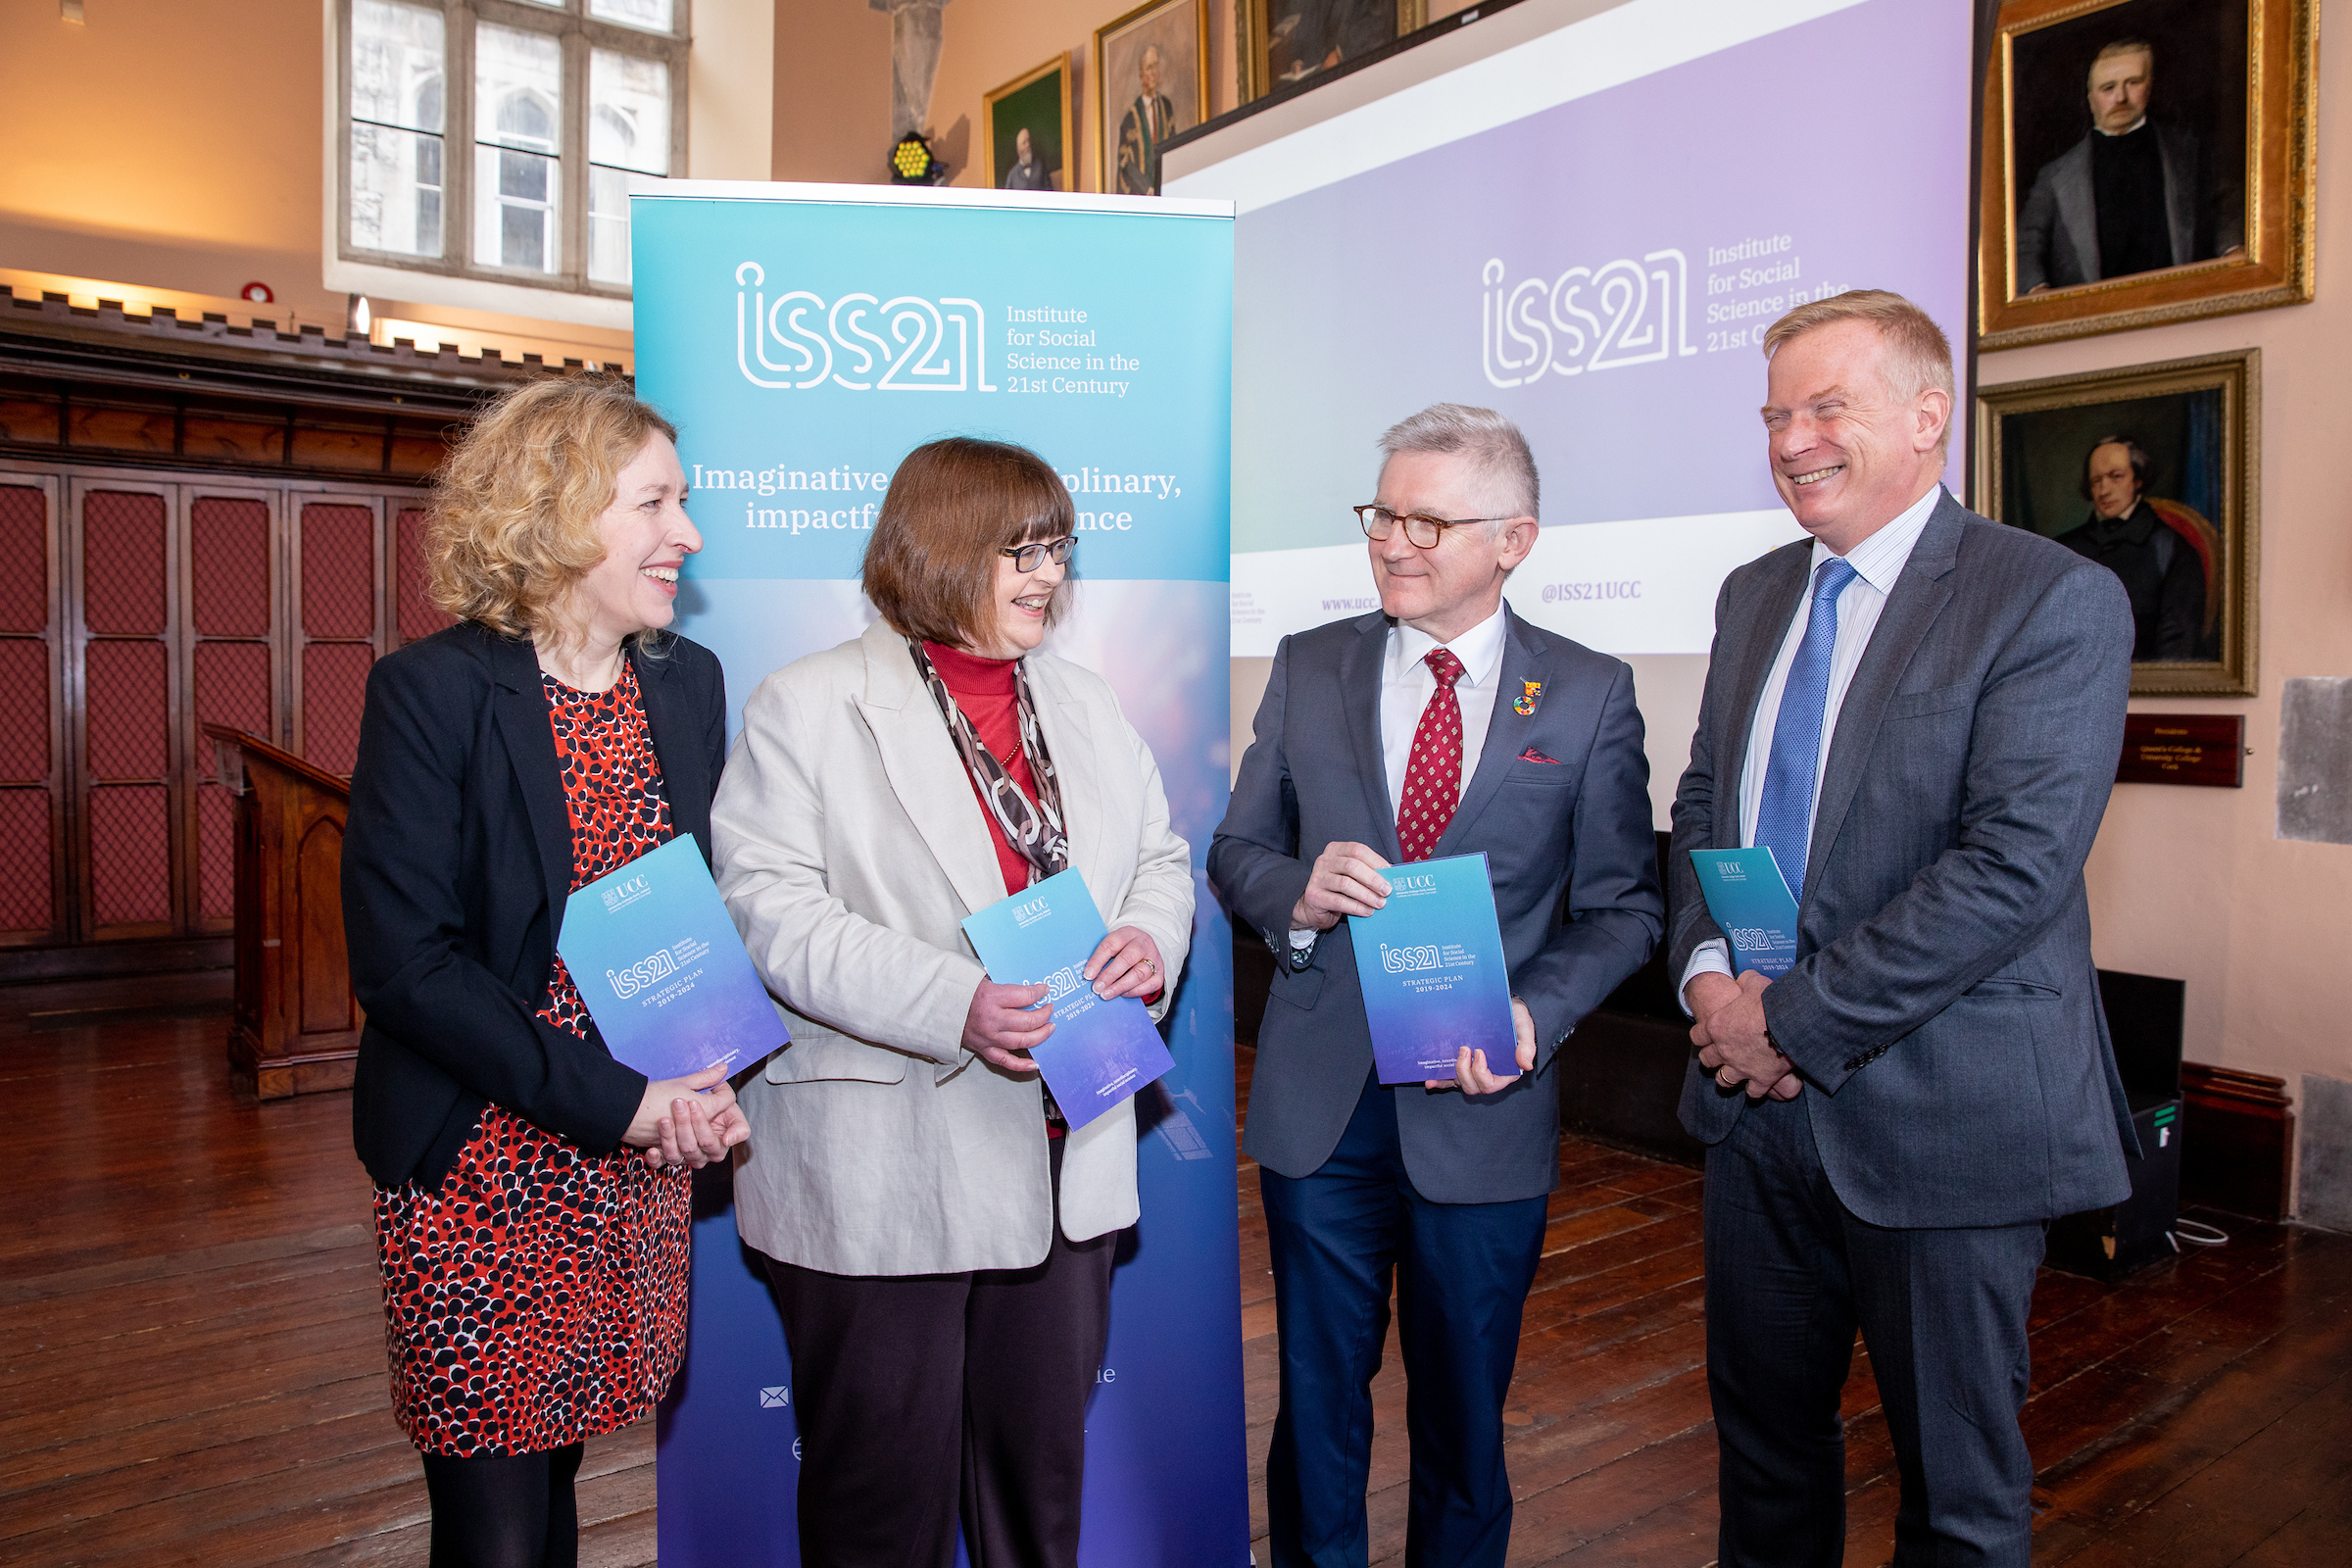 Launch of ISS21 Strategic Plan 2019-2024